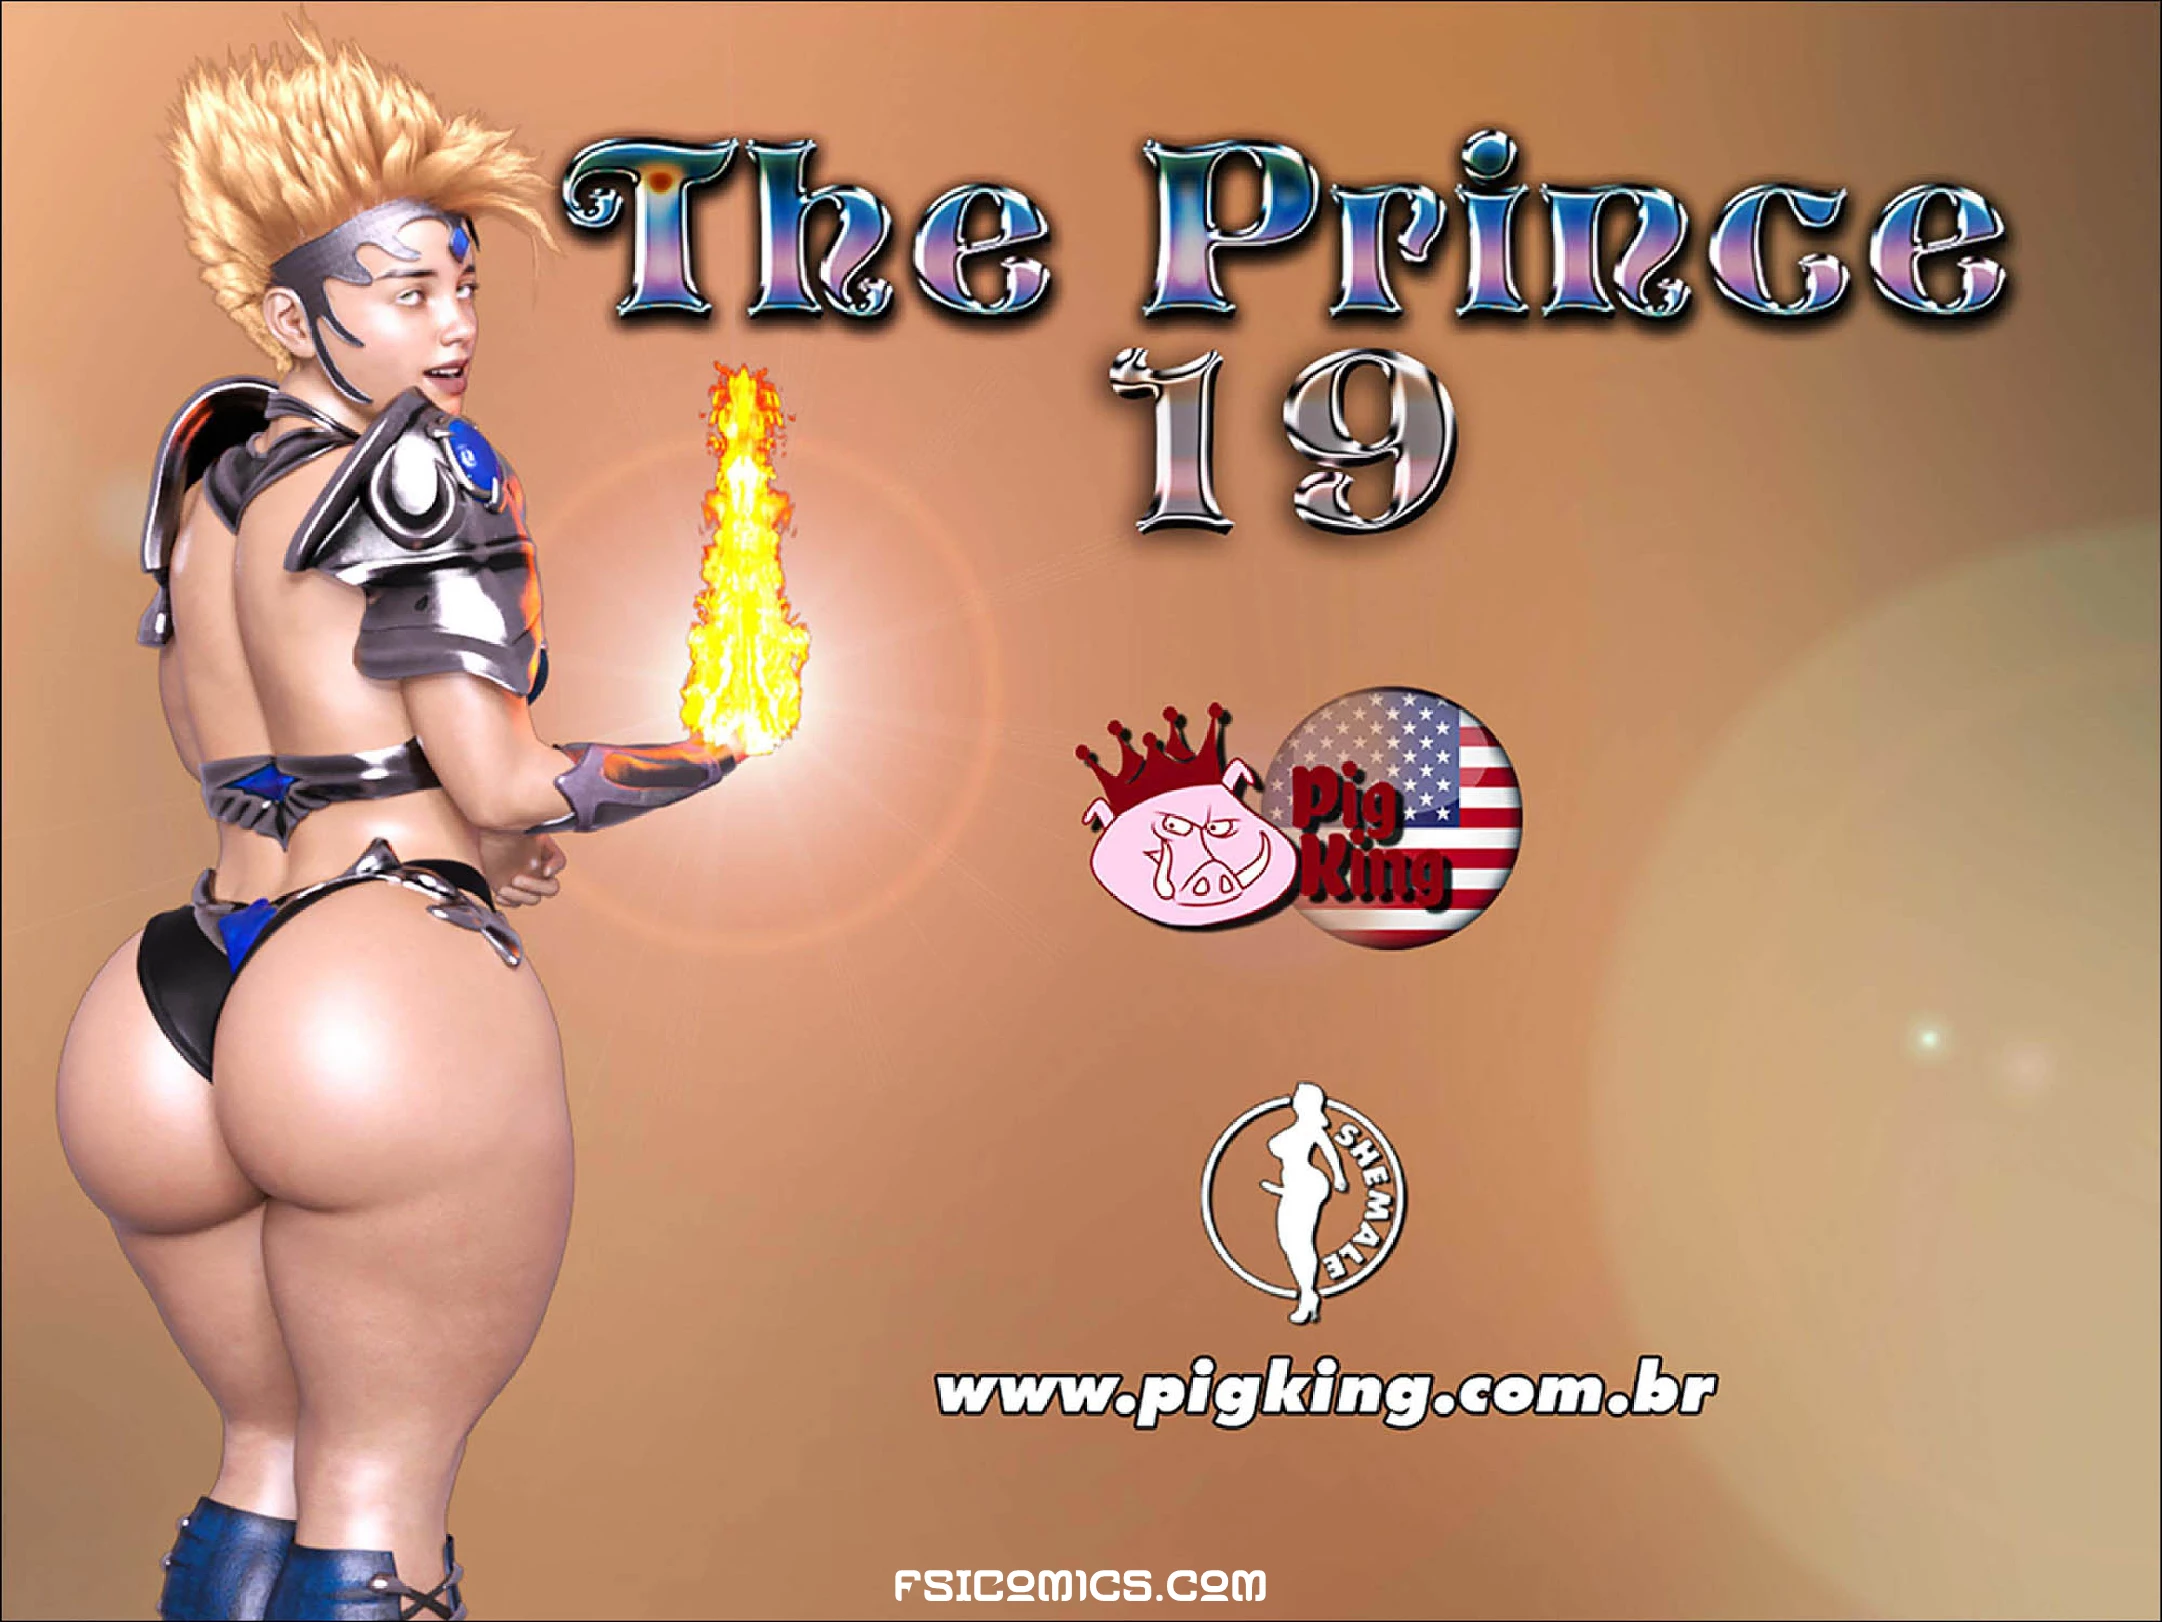 The Prince Chapter 19 – PigKing - 182 - FSIComics